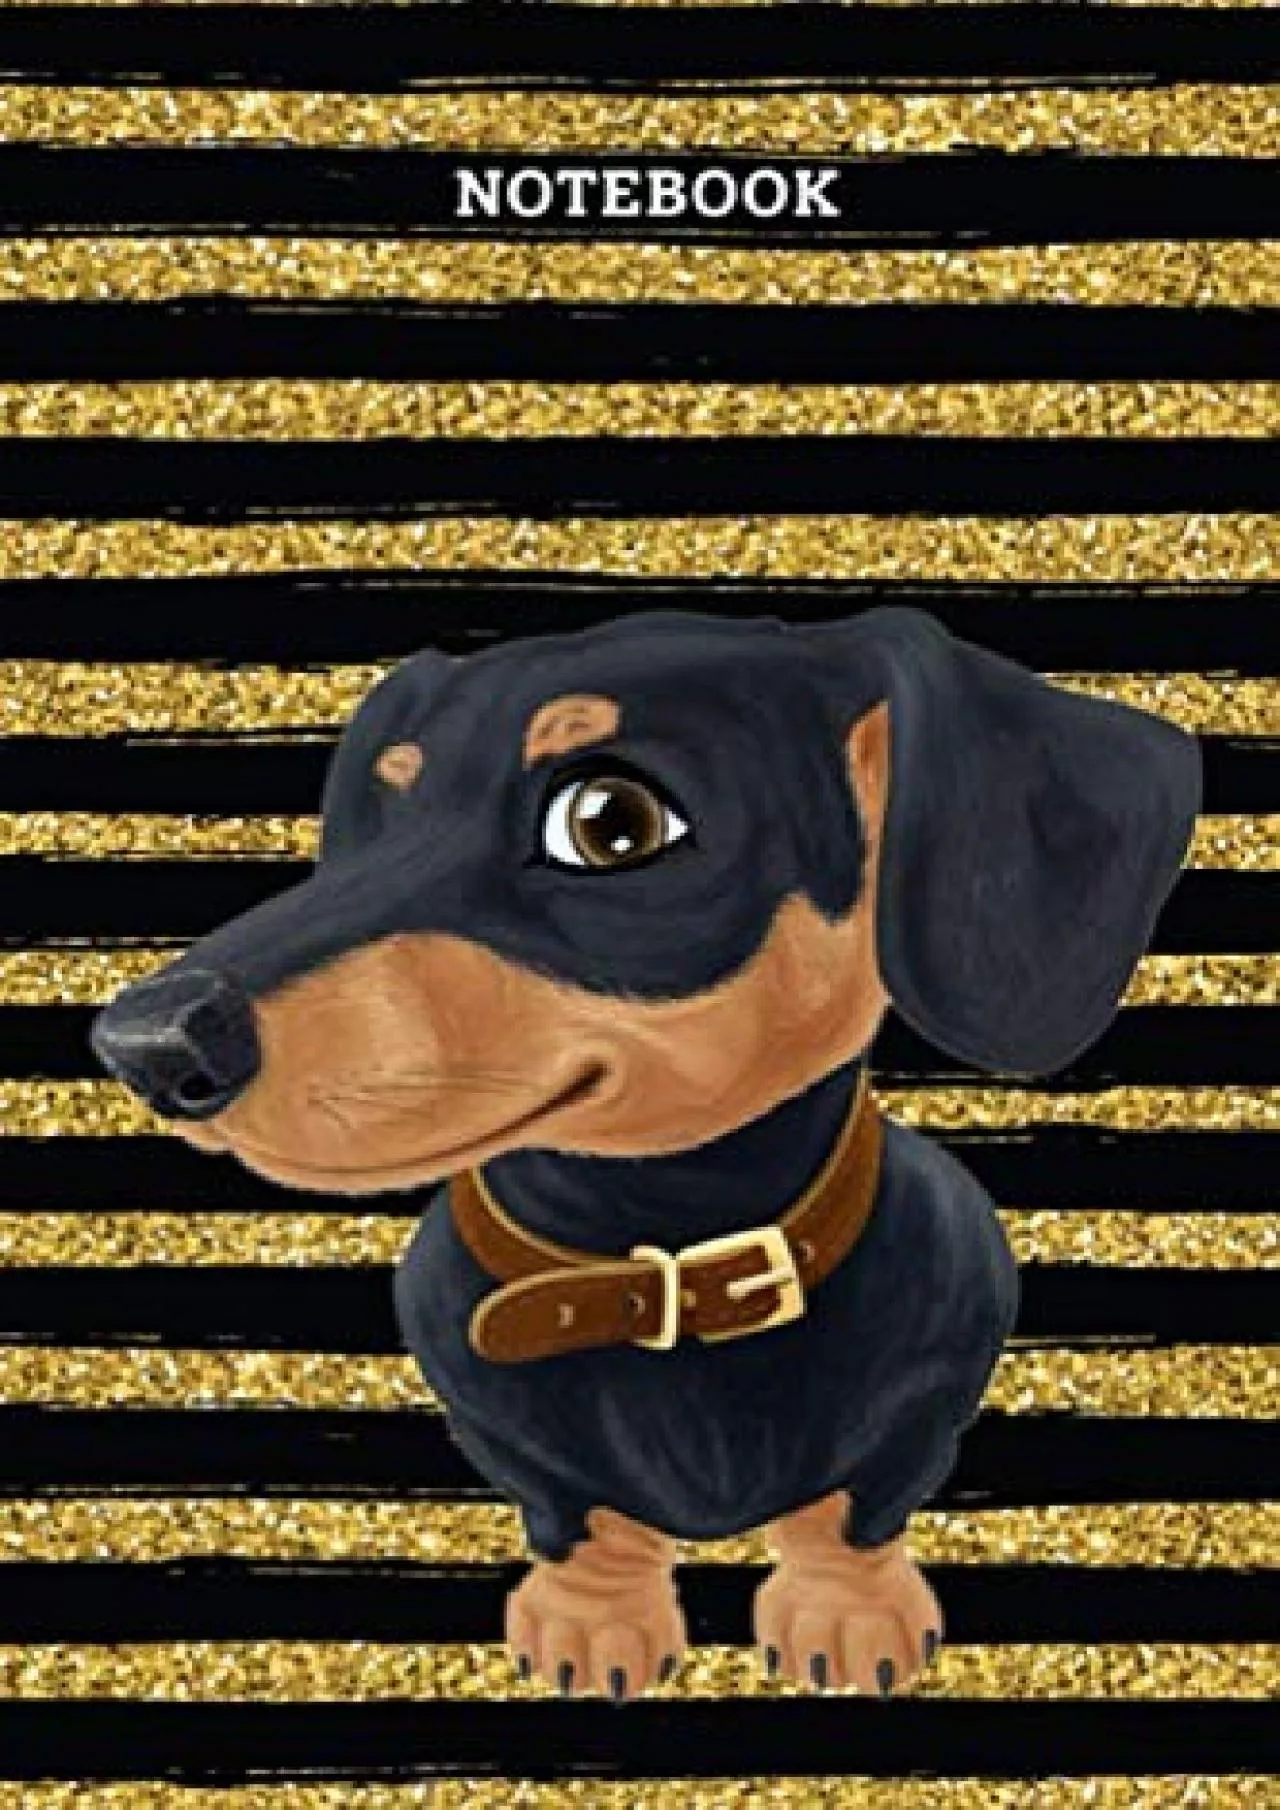 (EBOOK)-Notebook: Funny Dachshund Dog Blank Lined Journal To Write In For Notes, Ideas,